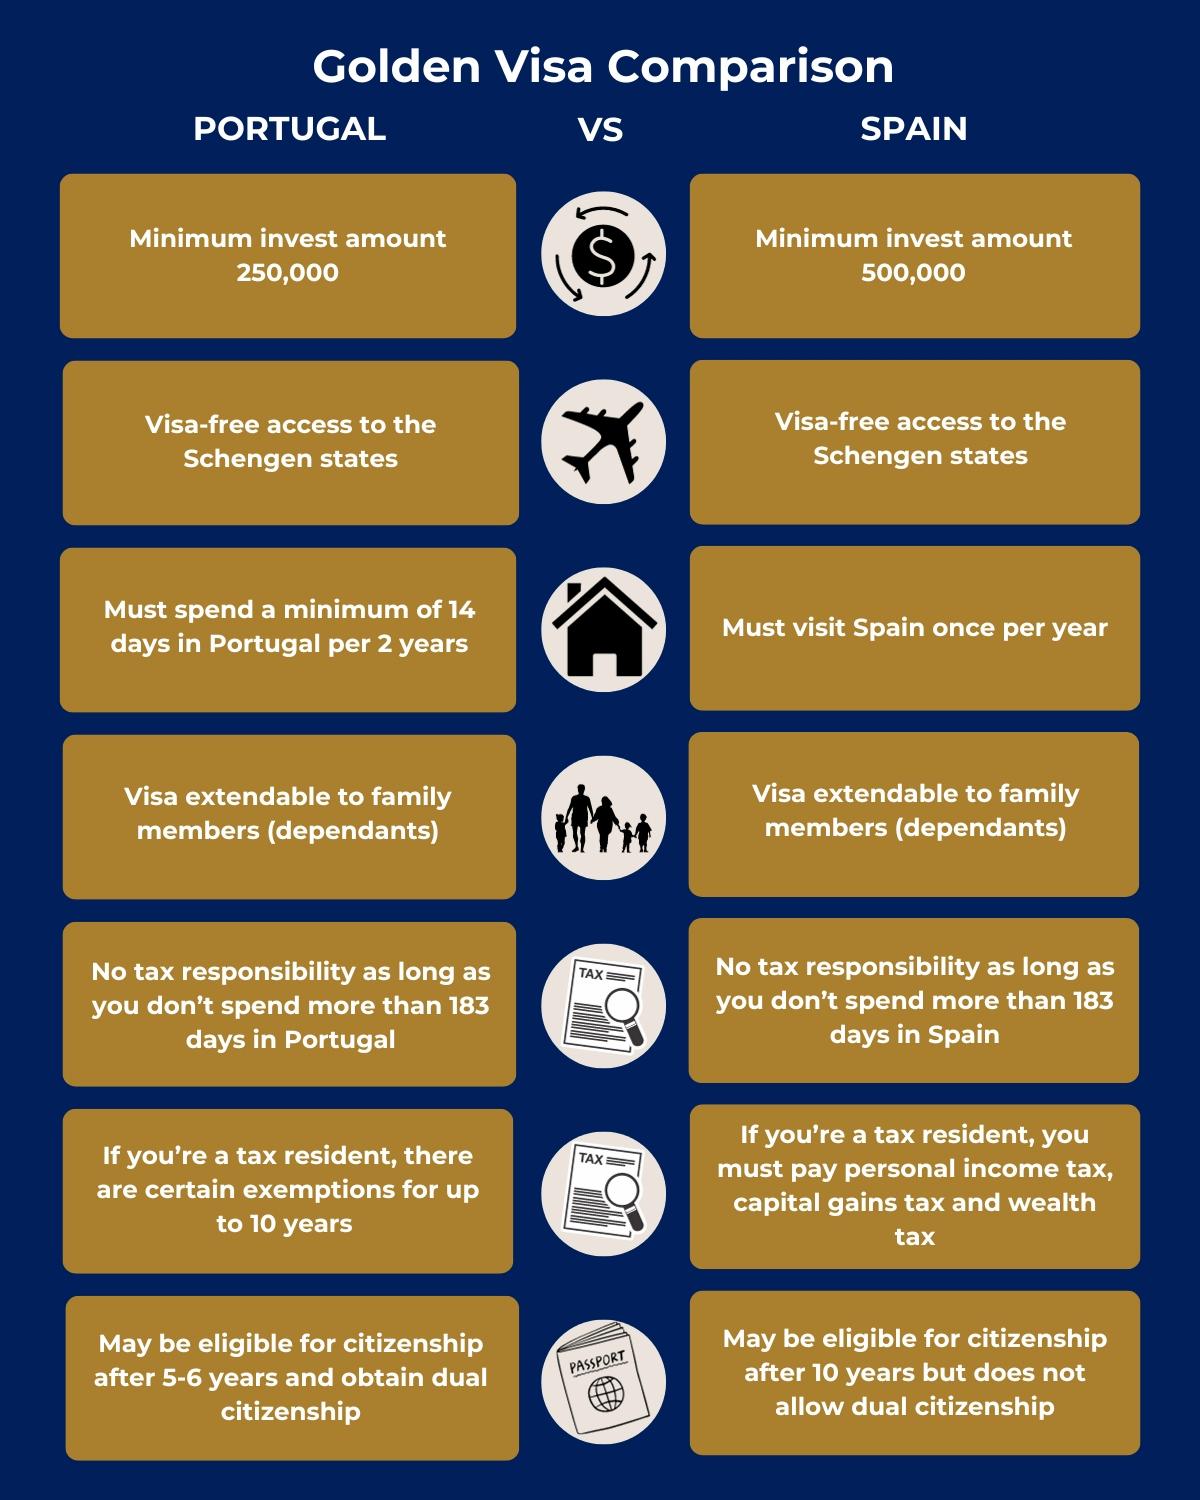 An infographic detailing the benefits and limitations of both the Portuguese and Spanish Golden Visa Programs.